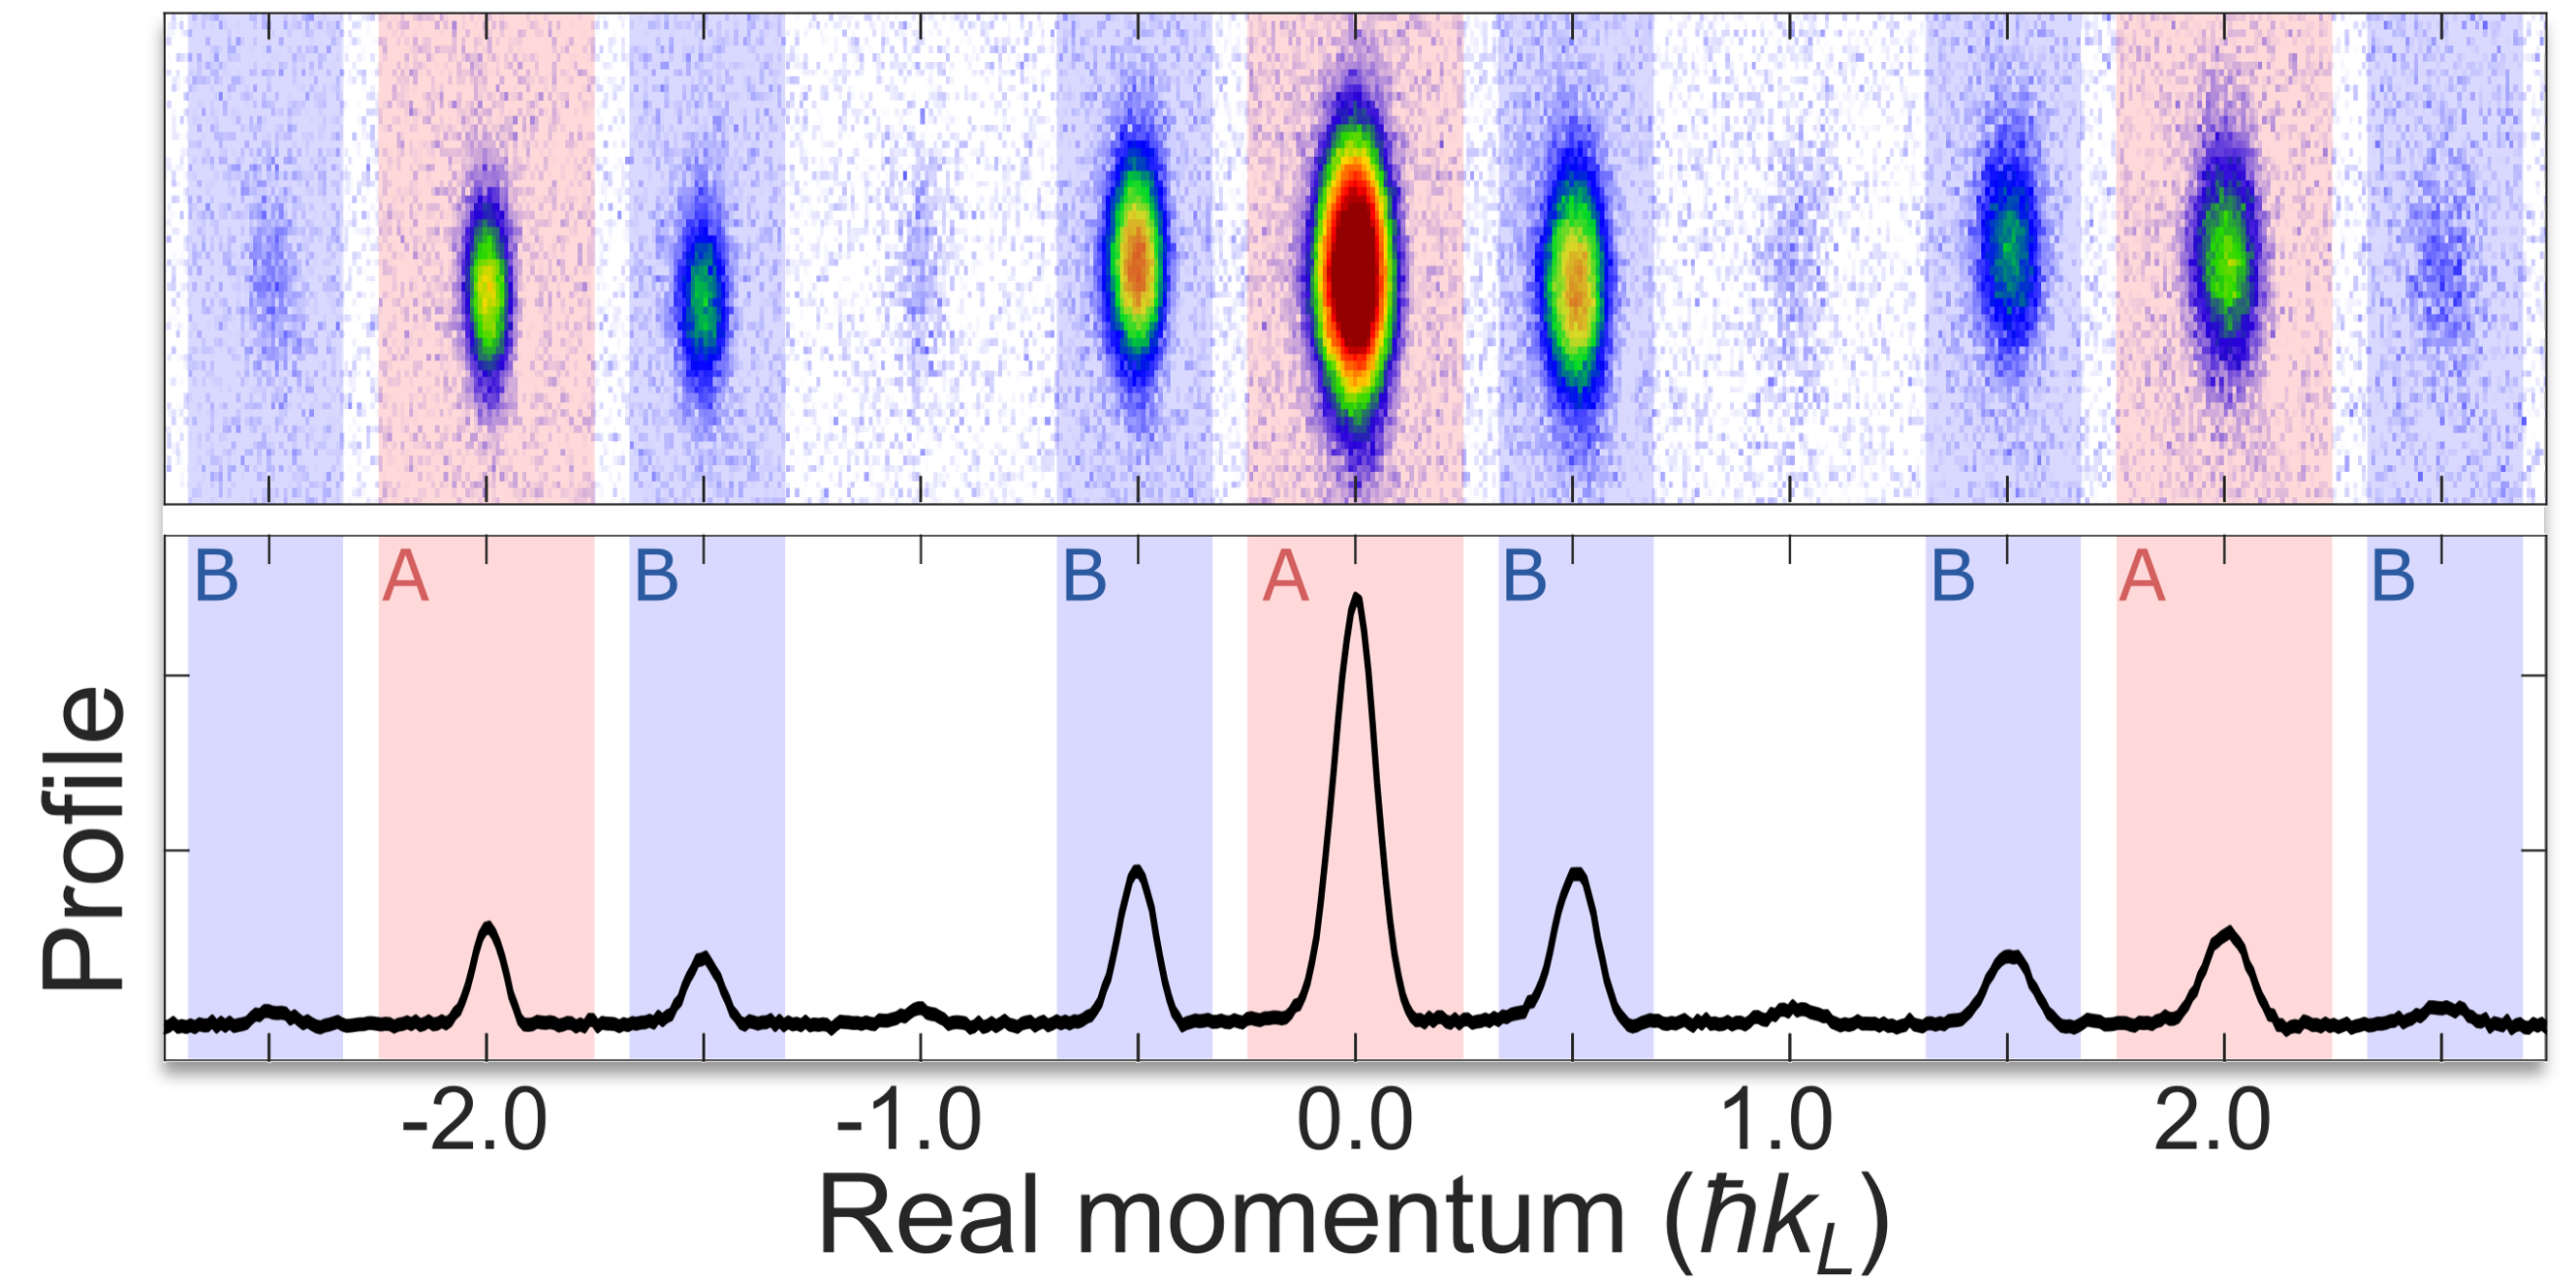 Absorption images of excitation modes